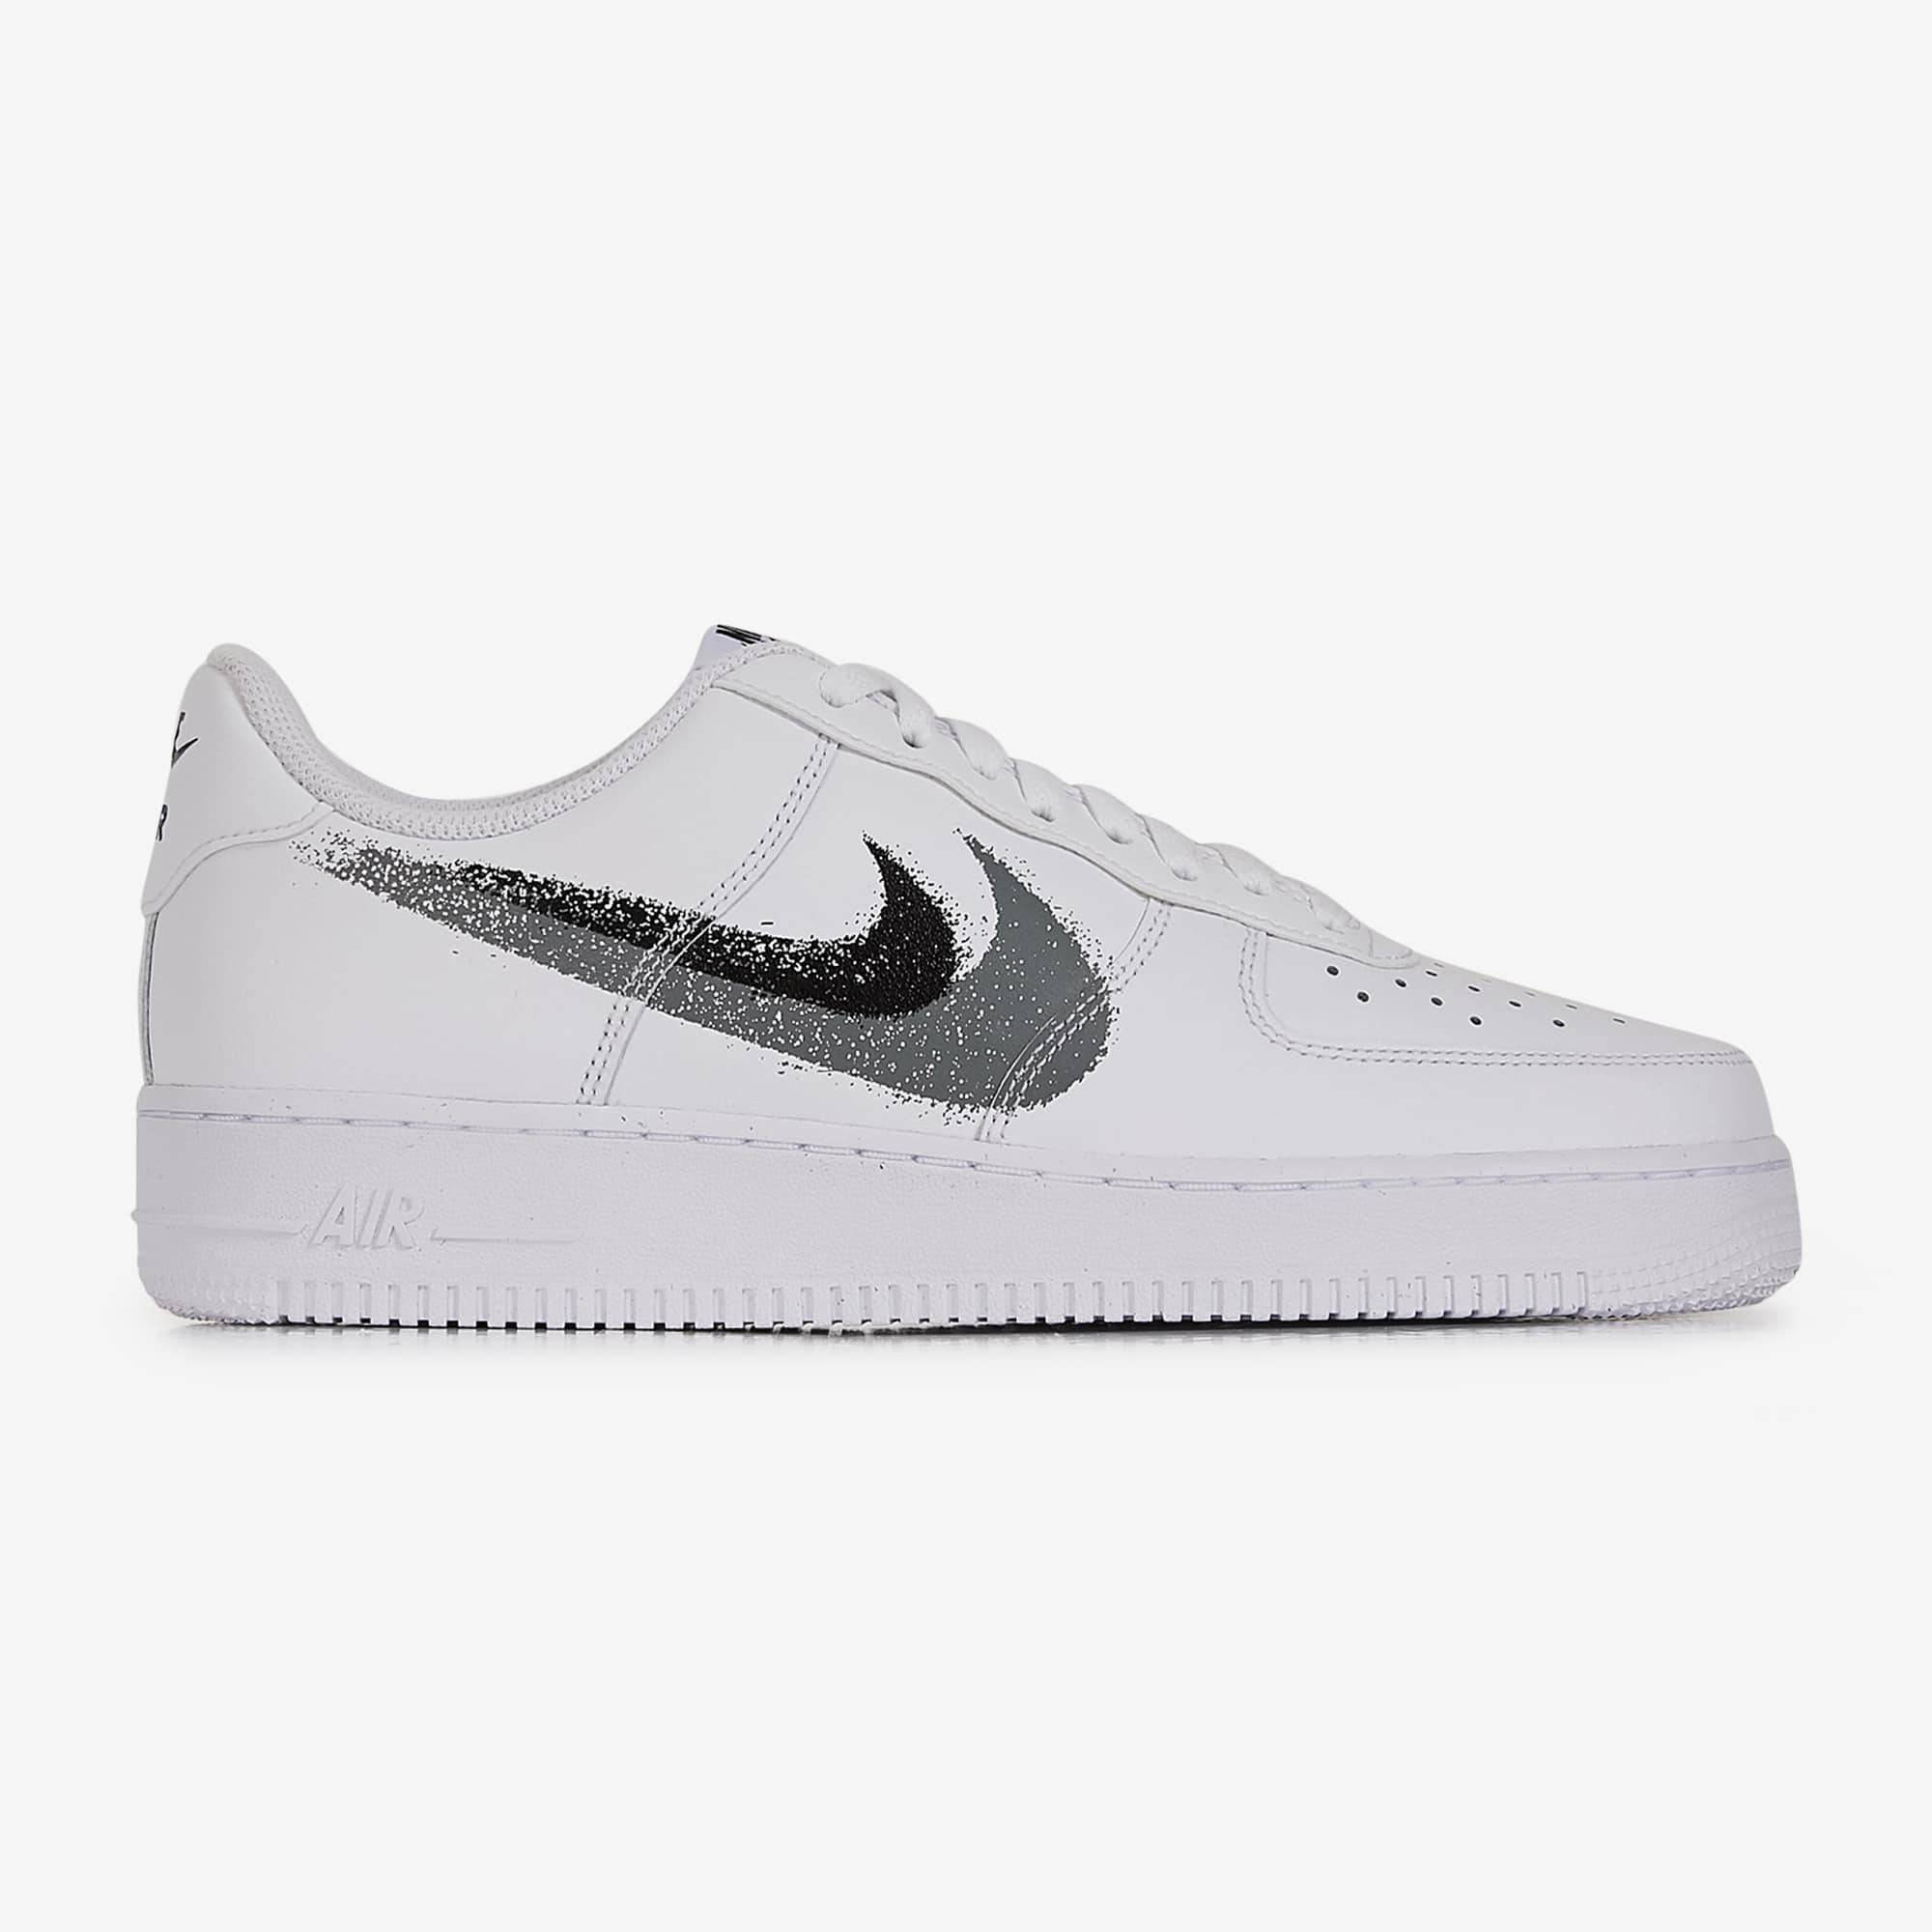 Madison oorsprong shampoo NIKE AIR FORCE 1 LOW SPRAY PAINT WIT/ZWART - SNEAKERS HEREN | Courir.be